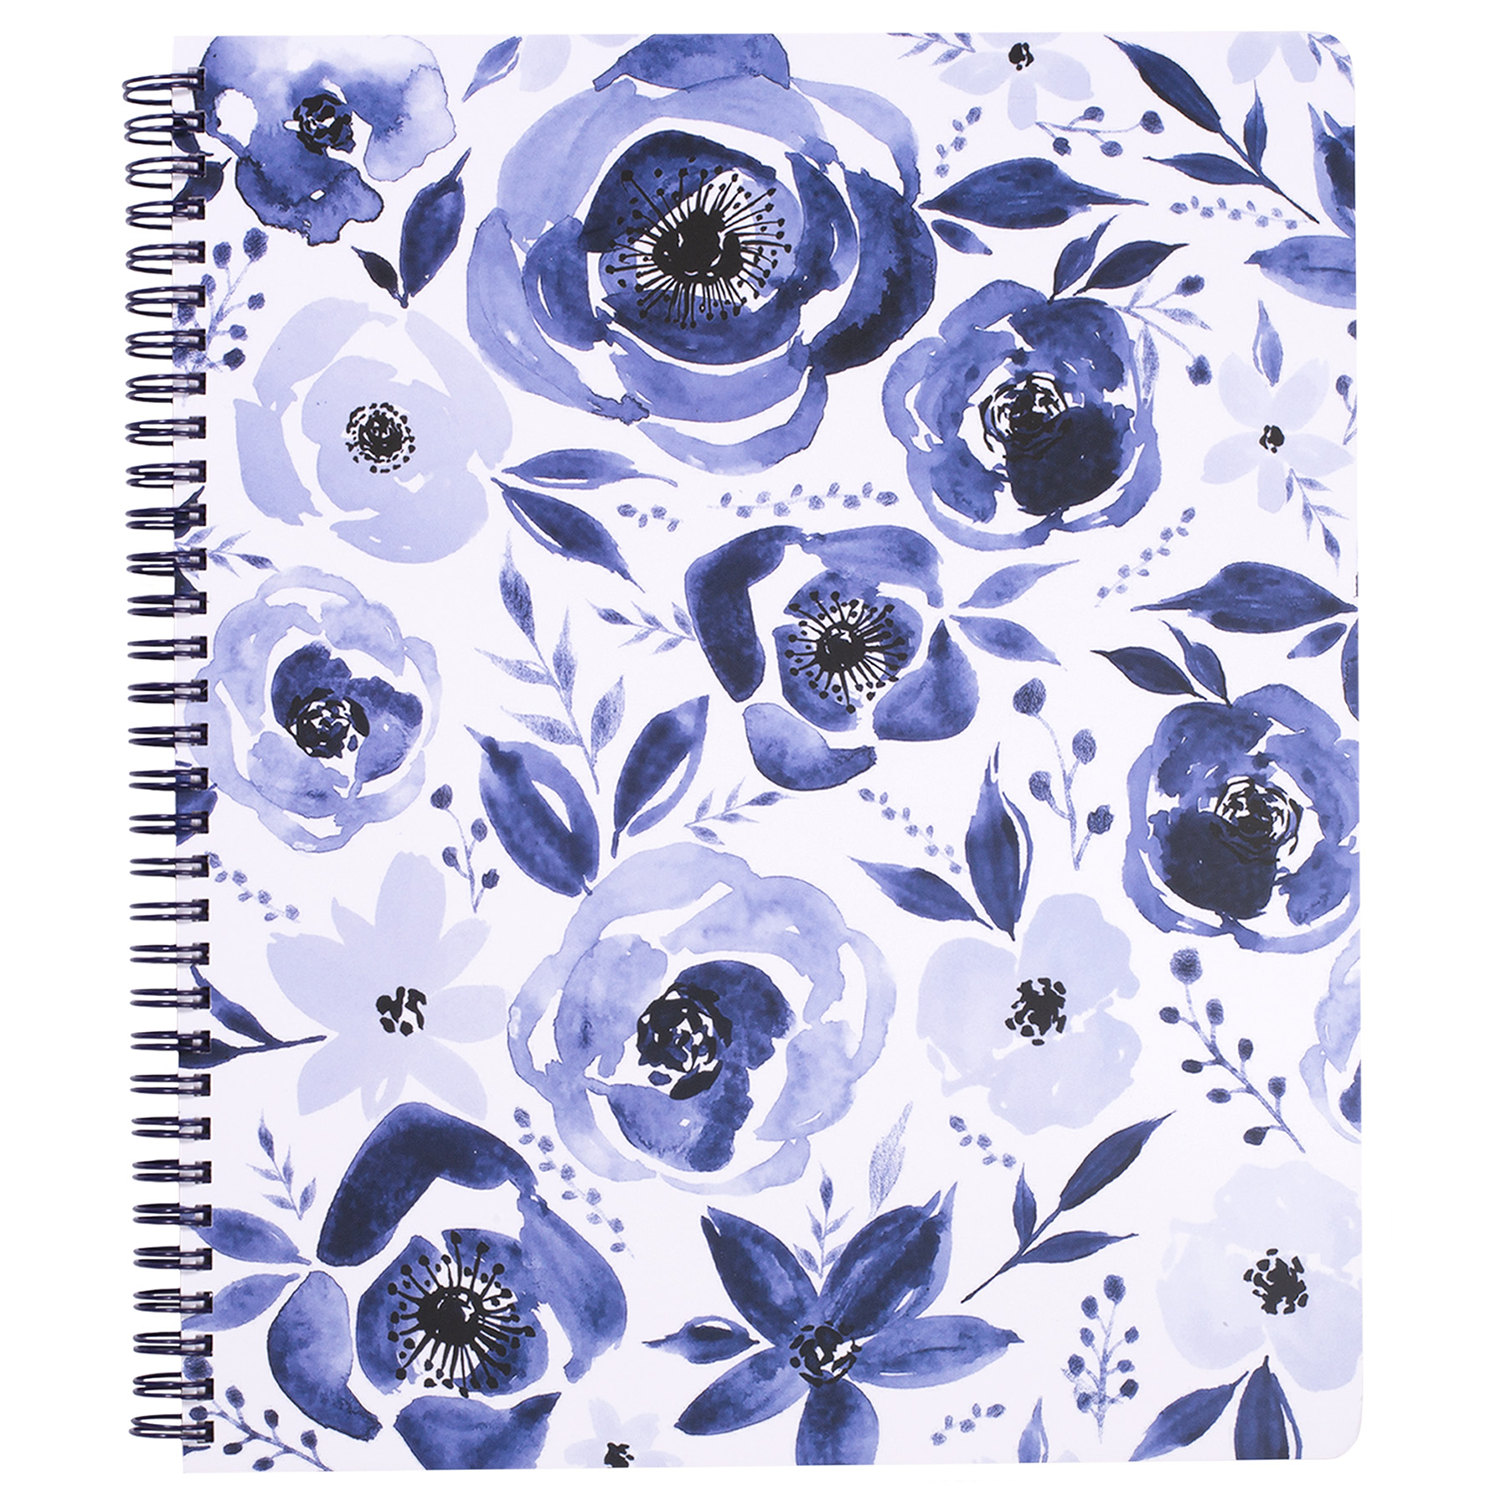  Watercolor Blue Floral Notepad Set, Floral Stationary